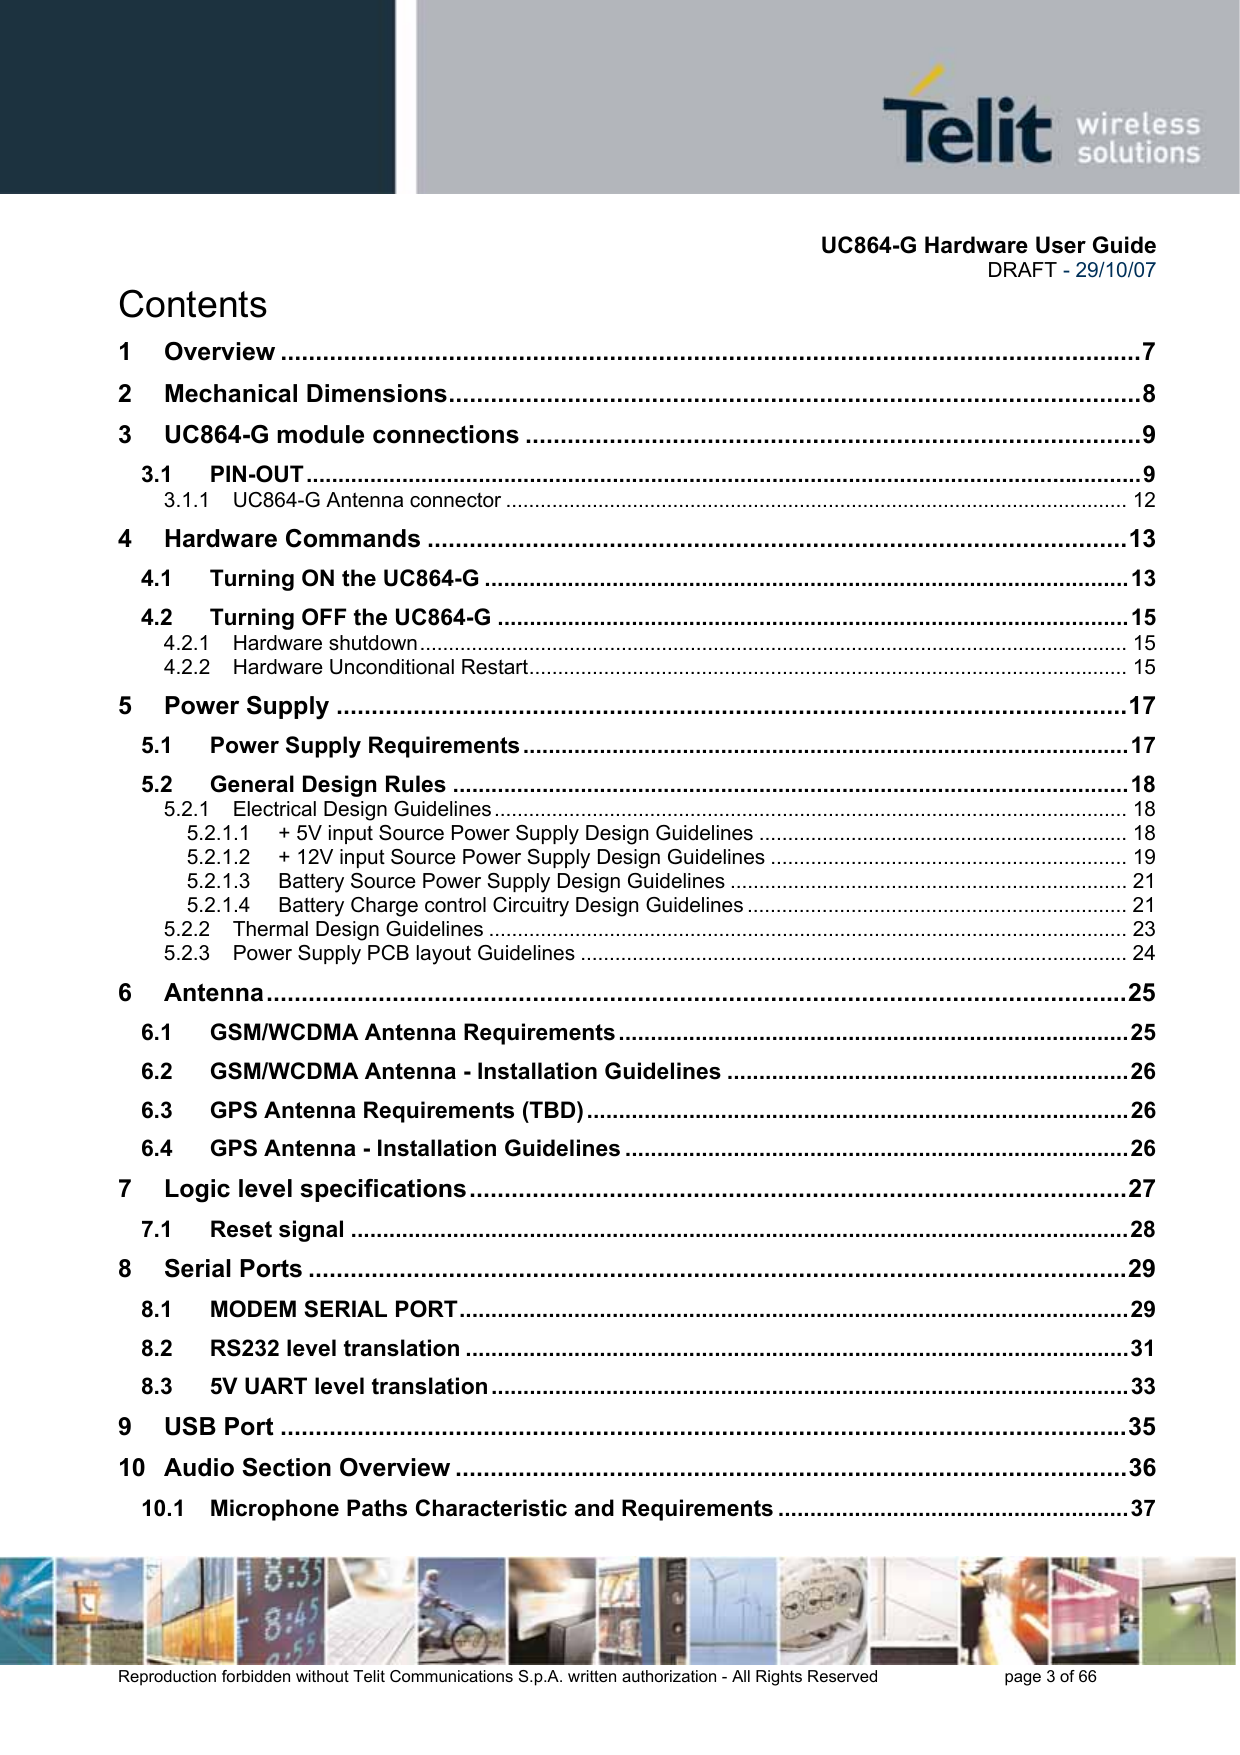       UC864-G Hardware User Guide  DRAFT - 29/10/07      Reproduction forbidden without Telit Communications S.p.A. written authorization - All Rights Reserved    page 3 of 66  Contents 1 Overview ...........................................................................................................................7 2 Mechanical Dimensions...................................................................................................8 3 UC864-G module connections ........................................................................................9 3.1 PIN-OUT...................................................................................................................................9 3.1.1 UC864-G Antenna connector ............................................................................................................ 12 4 Hardware Commands ....................................................................................................13 4.1 Turning ON the UC864-G .....................................................................................................13 4.2 Turning OFF the UC864-G ...................................................................................................15 4.2.1 Hardware shutdown........................................................................................................................... 15 4.2.2 Hardware Unconditional Restart........................................................................................................ 15 5 Power Supply .................................................................................................................17 5.1 Power Supply Requirements...............................................................................................17 5.2 General Design Rules ..........................................................................................................18 5.2.1 Electrical Design Guidelines .............................................................................................................. 18 5.2.1.1 + 5V input Source Power Supply Design Guidelines ................................................................ 18 5.2.1.2 + 12V input Source Power Supply Design Guidelines .............................................................. 19 5.2.1.3 Battery Source Power Supply Design Guidelines ..................................................................... 21 5.2.1.4 Battery Charge control Circuitry Design Guidelines .................................................................. 21 5.2.2 Thermal Design Guidelines ............................................................................................................... 23 5.2.3 Power Supply PCB layout Guidelines ............................................................................................... 24 6 Antenna...........................................................................................................................25 6.1 GSM/WCDMA Antenna Requirements ................................................................................25 6.2 GSM/WCDMA Antenna - Installation Guidelines ...............................................................26 6.3 GPS Antenna Requirements (TBD) .....................................................................................26 6.4 GPS Antenna - Installation Guidelines ...............................................................................26 7 Logic level specifications..............................................................................................27 7.1 Reset signal ..........................................................................................................................28 8 Serial Ports .....................................................................................................................29 8.1 MODEM SERIAL PORT.........................................................................................................29 8.2 RS232 level translation ........................................................................................................31 8.3 5V UART level translation....................................................................................................33 9 USB Port .........................................................................................................................35 10 Audio Section Overview ................................................................................................36 10.1 Microphone Paths Characteristic and Requirements .......................................................37 